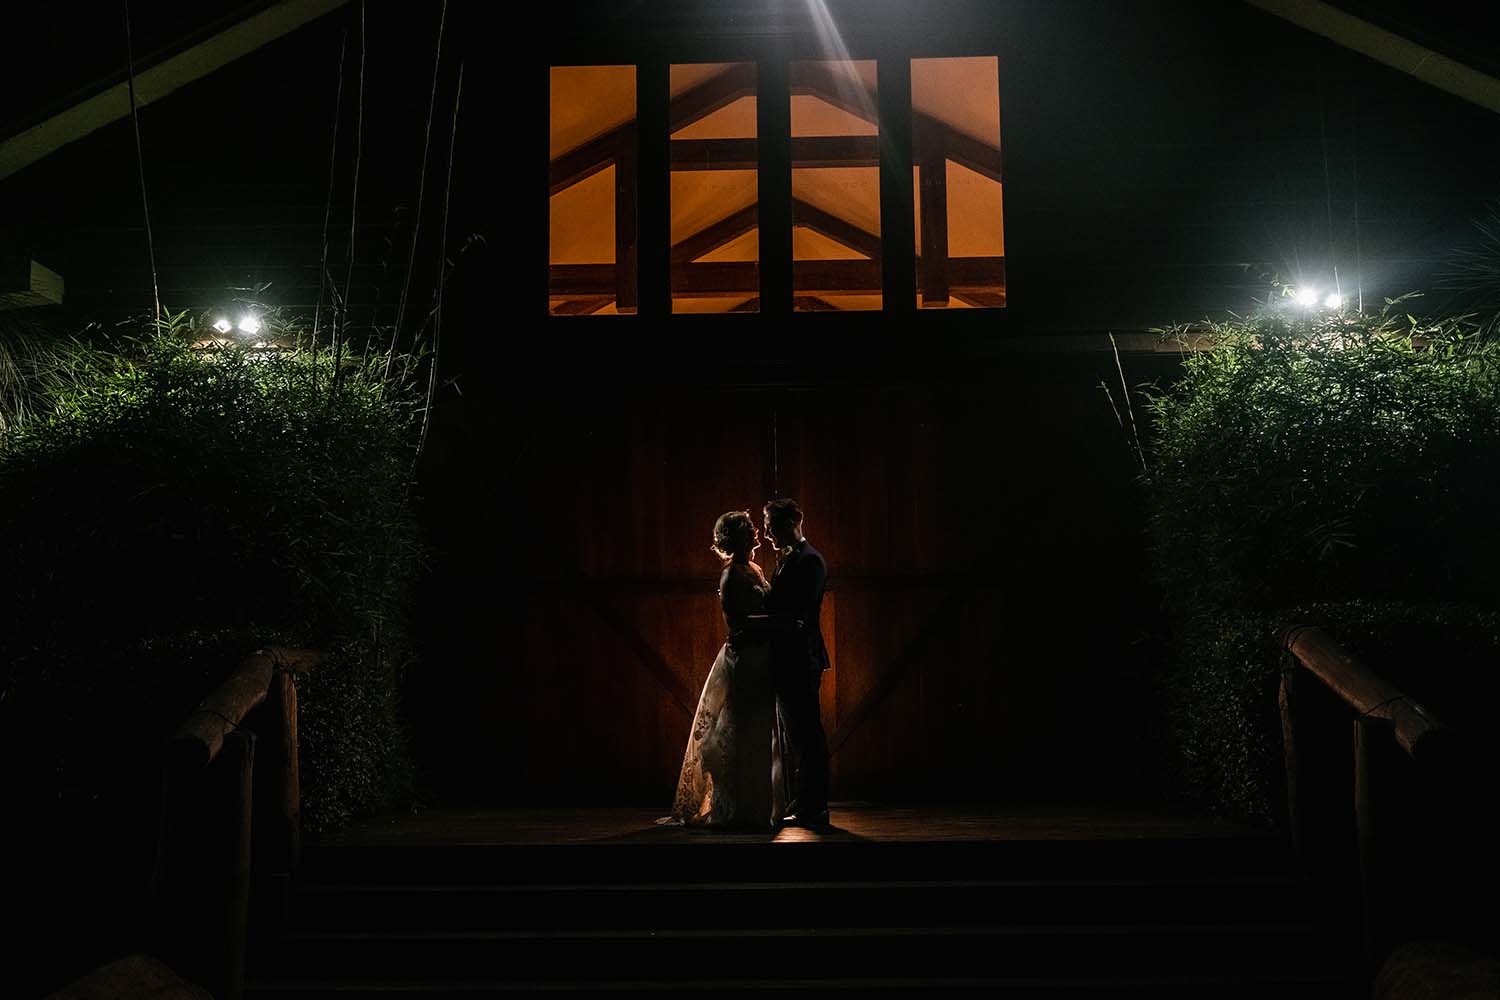 Wedding Photography - couple in front of barn at night